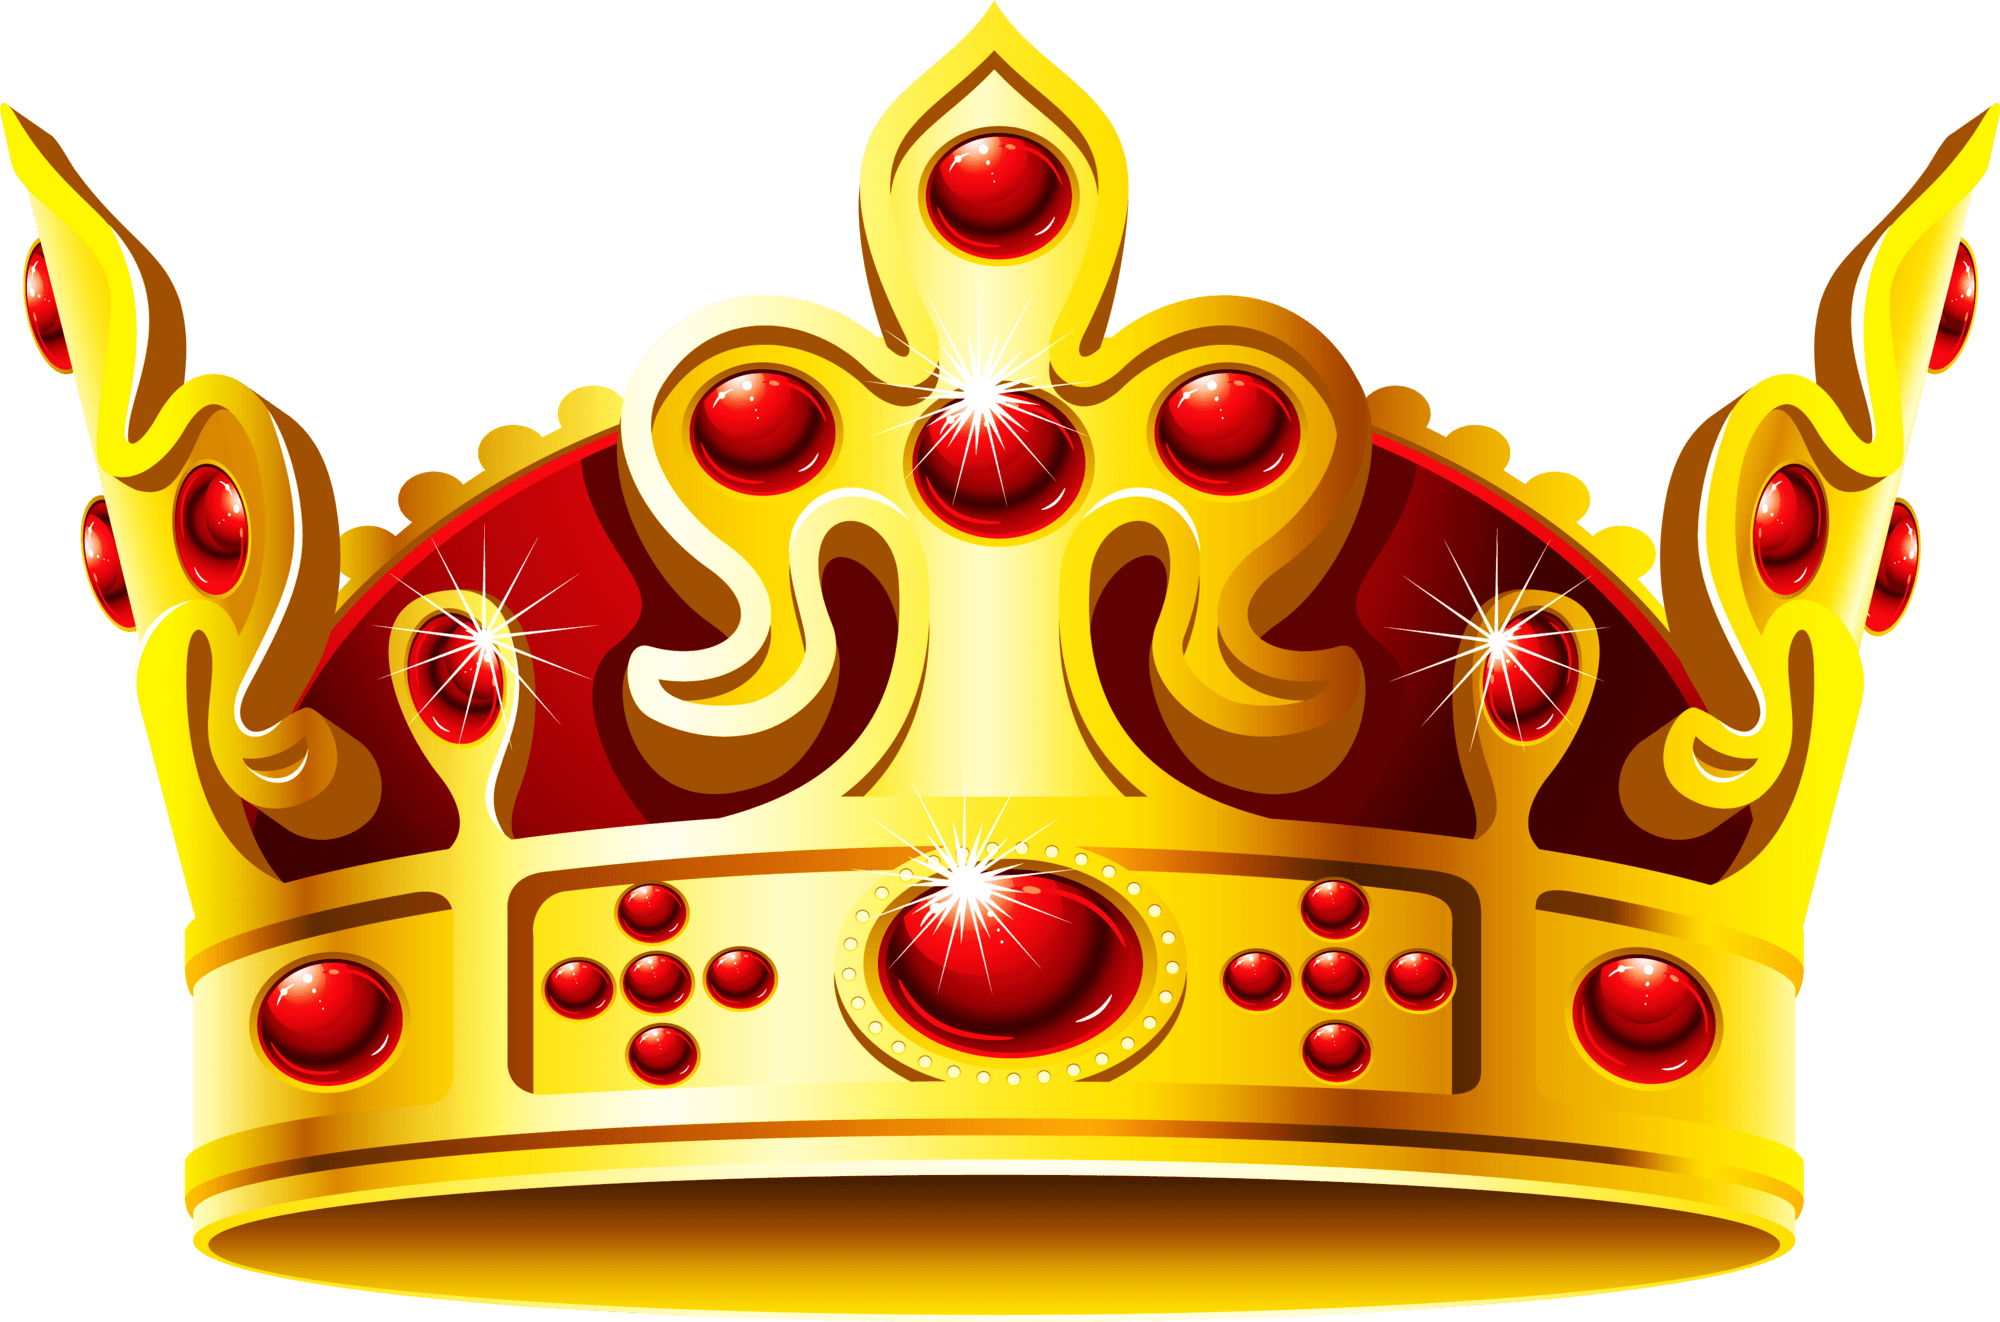 Gold crown clipart king and queen image